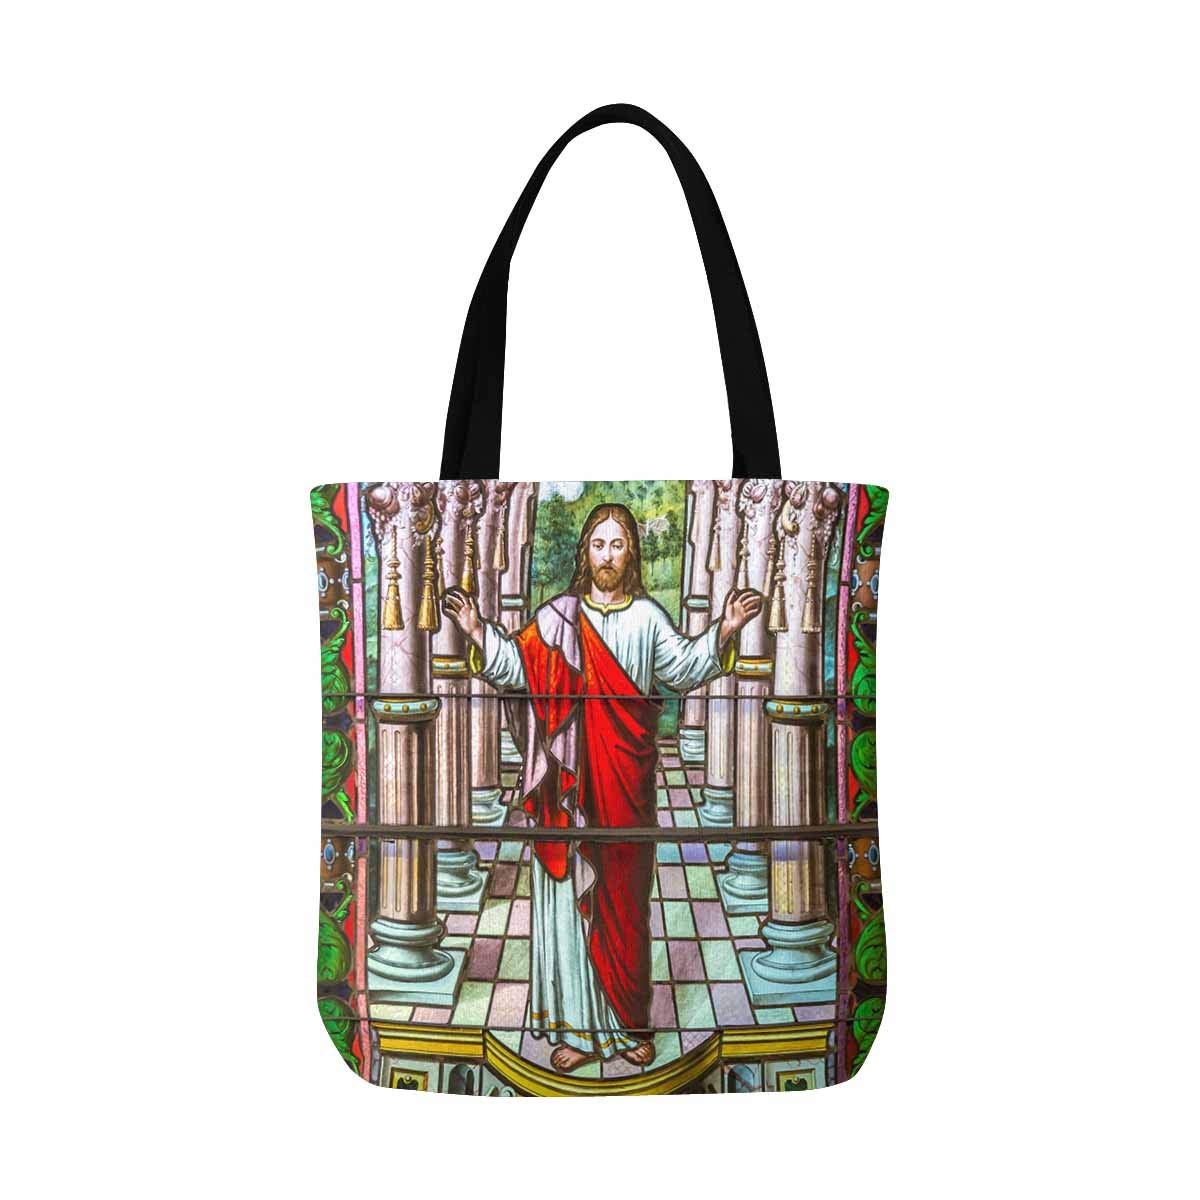 ASHLEIGH Stained Glass Religious Background Canvas Tote Bag Tote Shopping Bag Washable Grocery Tote Bag, Craft Canvas Bag for Women Men Kids - image 1 of 3